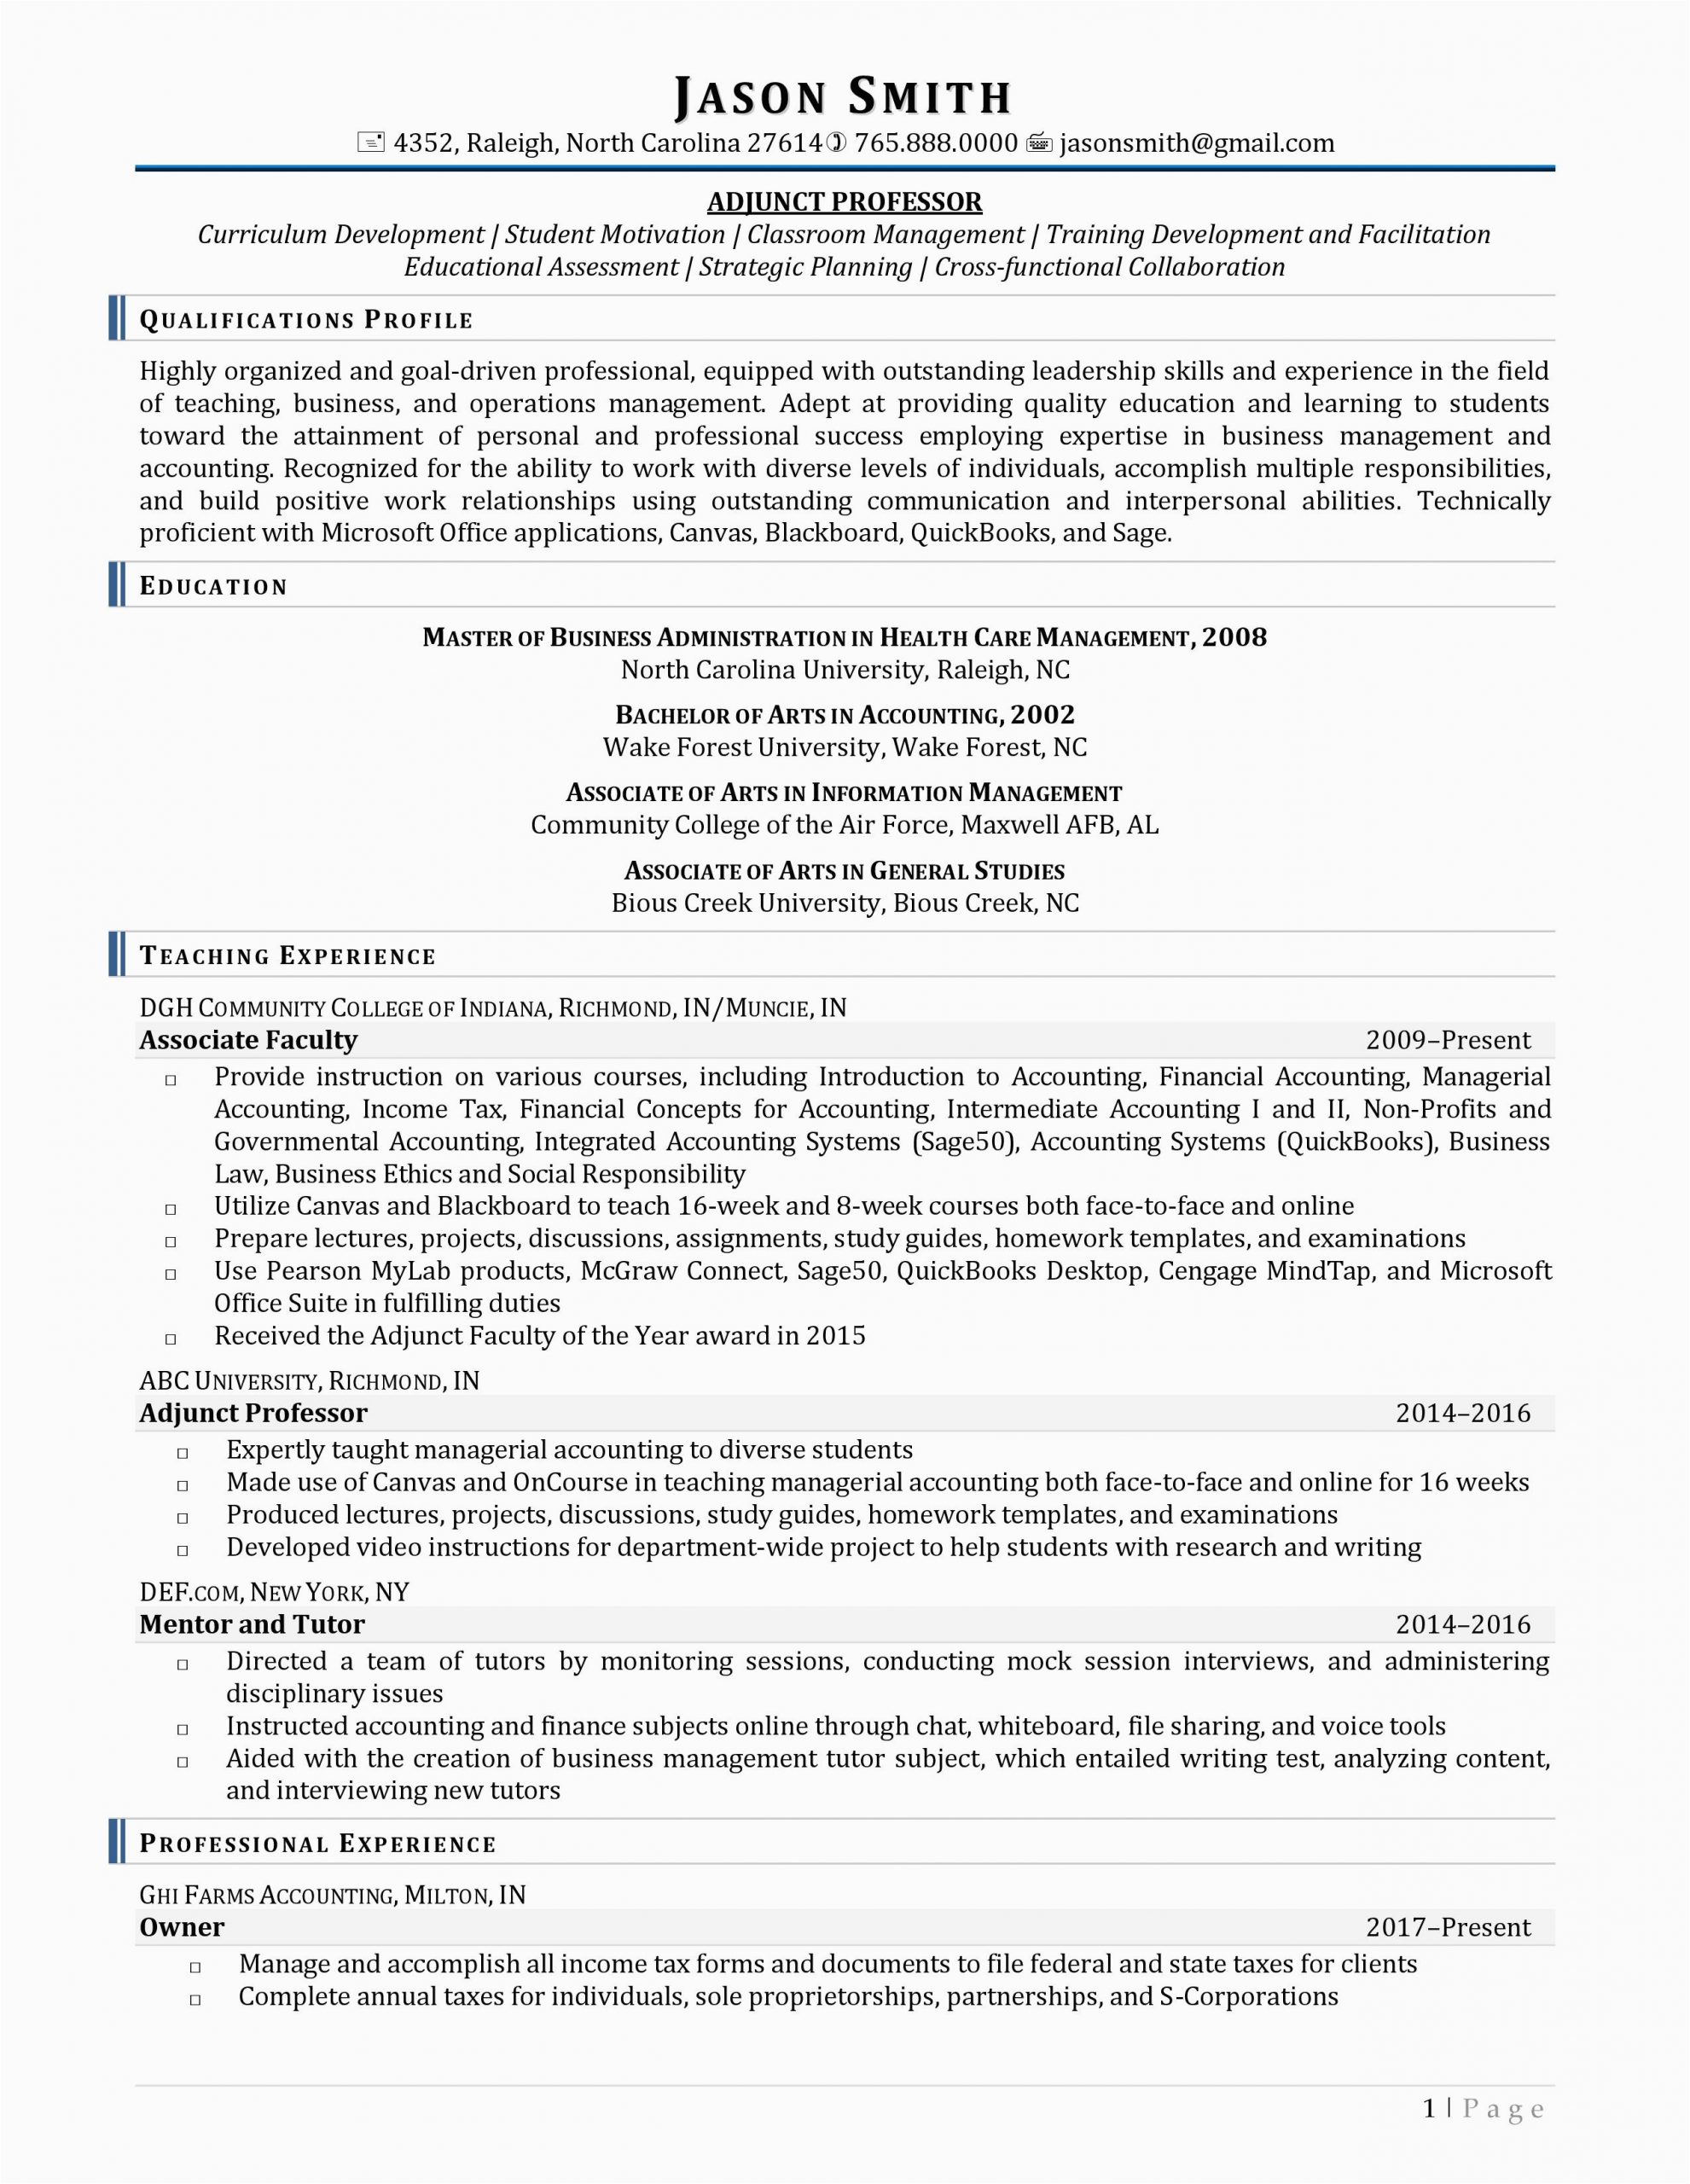 Resume Template for One Long Term Job Long Resume why Resume Length Matters In Your Job Search